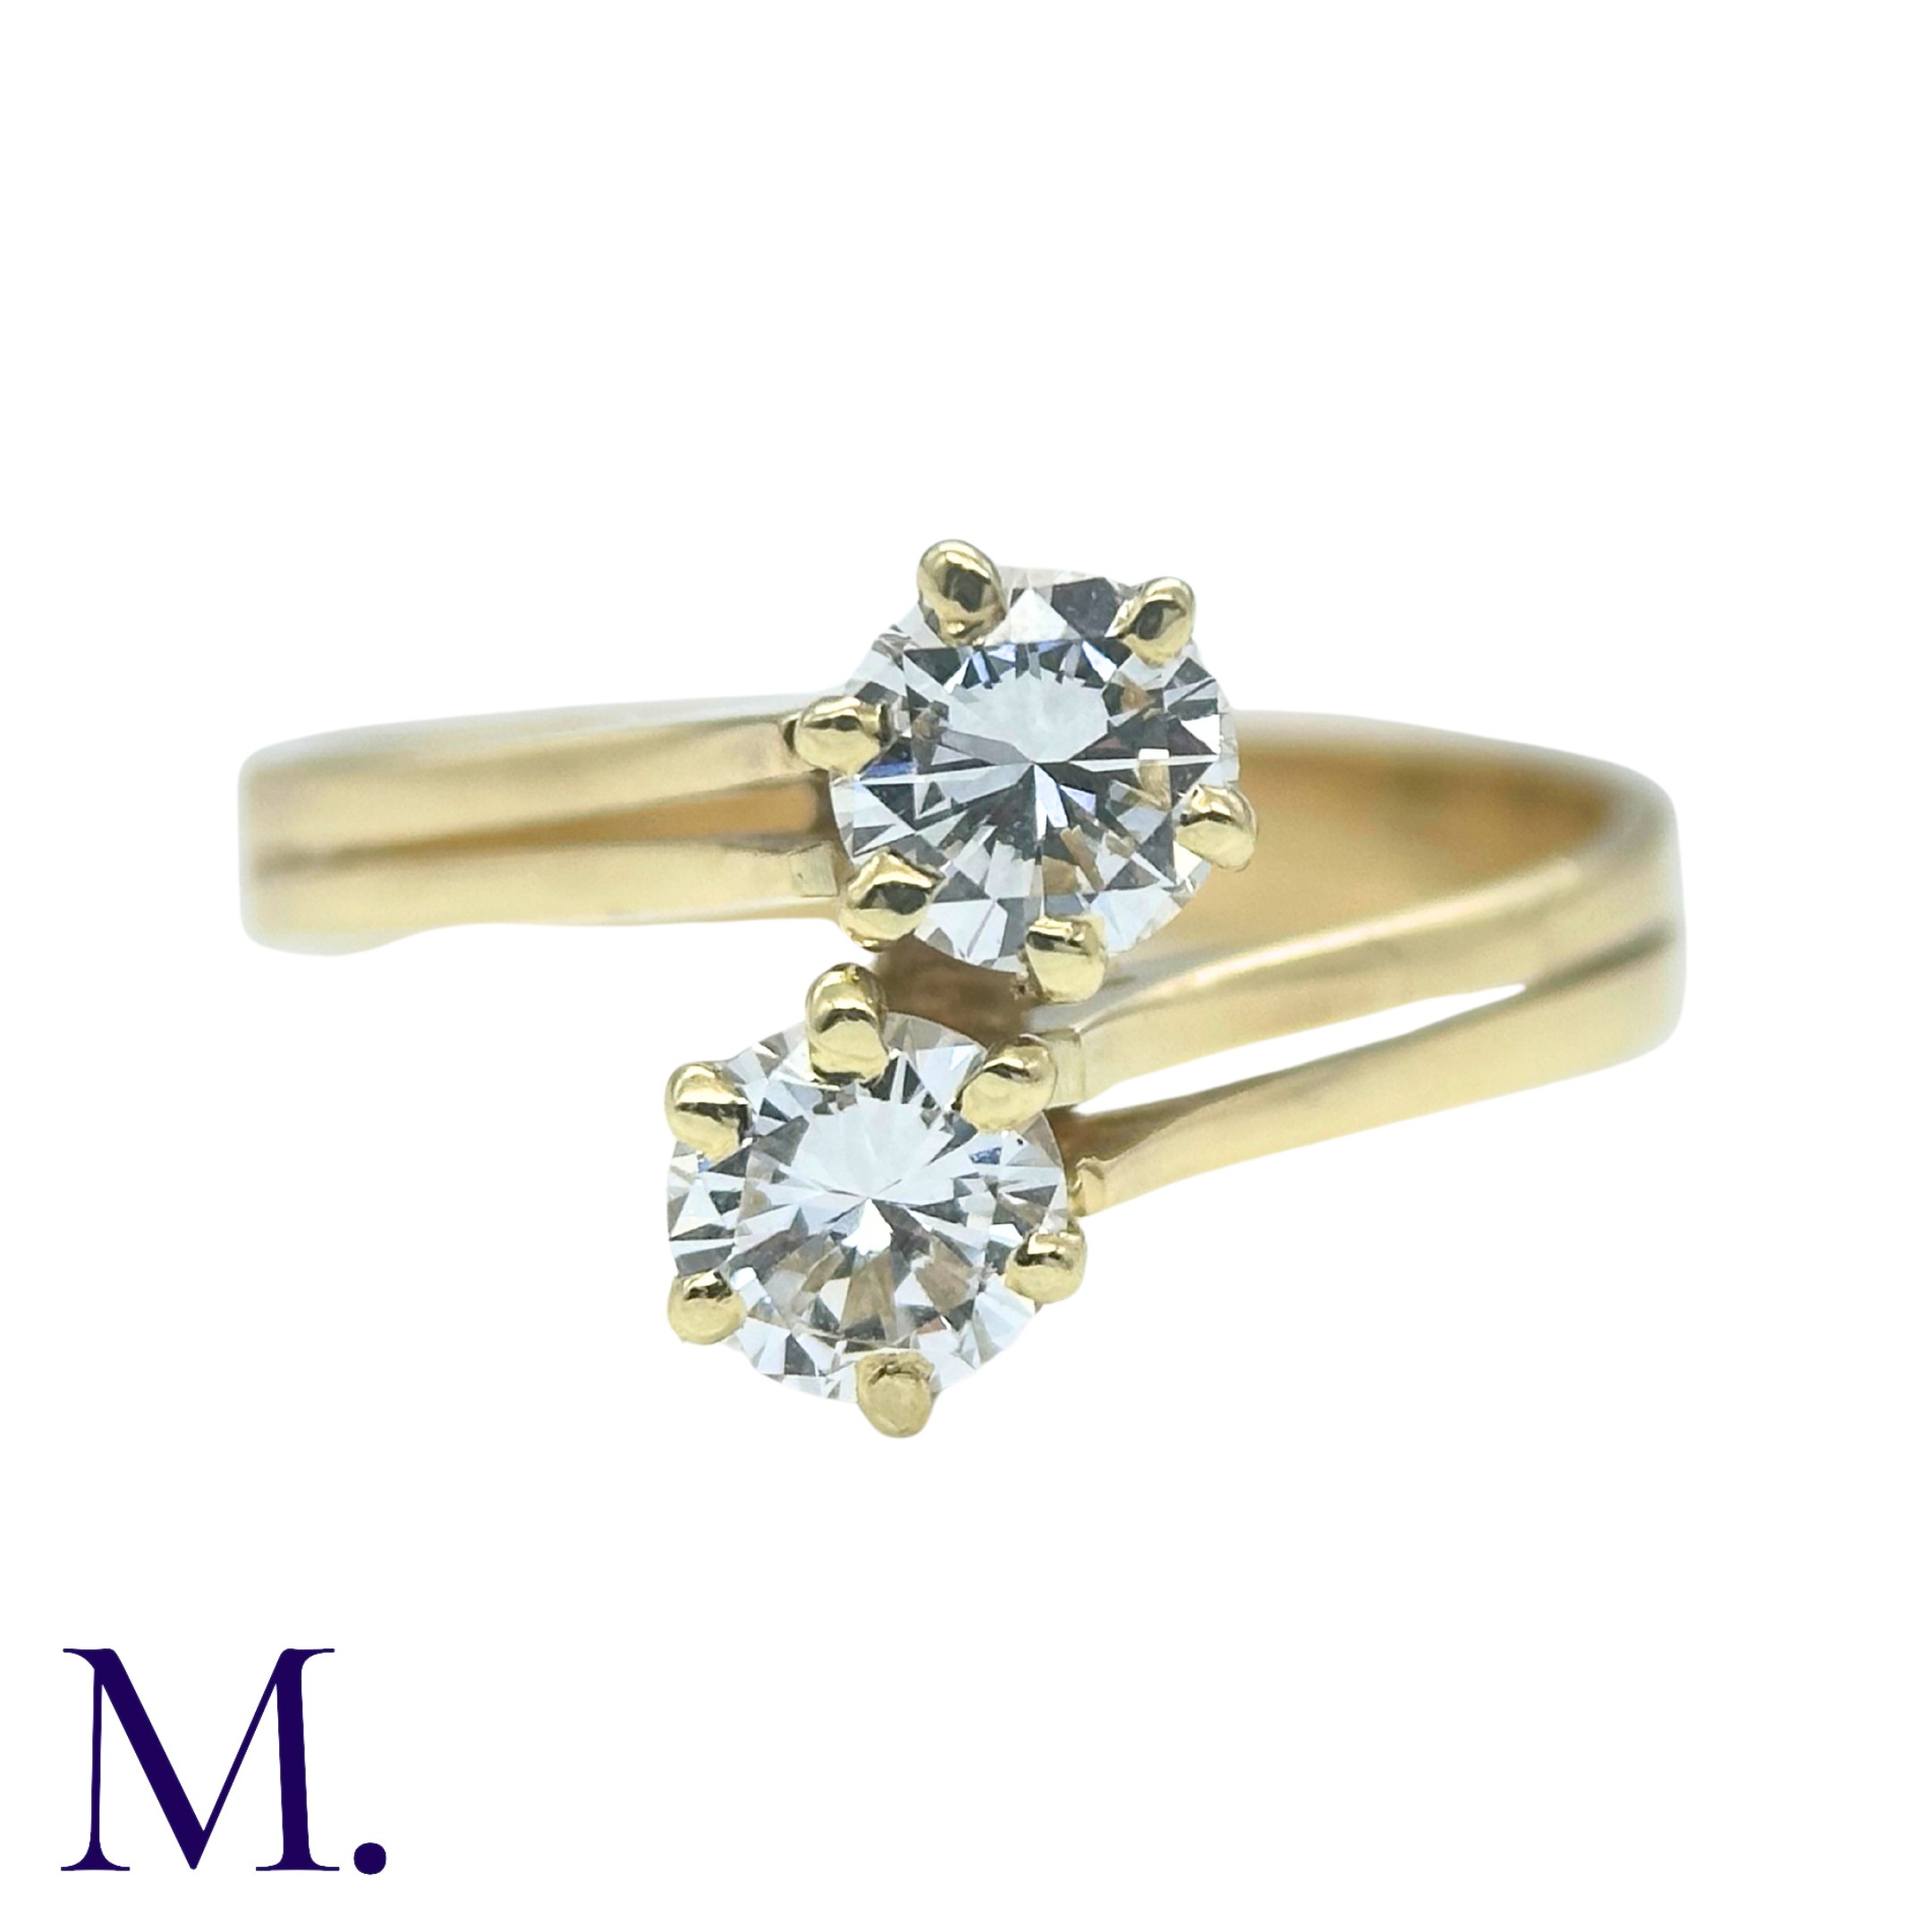 A Diamond 2-Stone Crossover Ring in 18K yellow gold, set with two round cut diamonds weighing